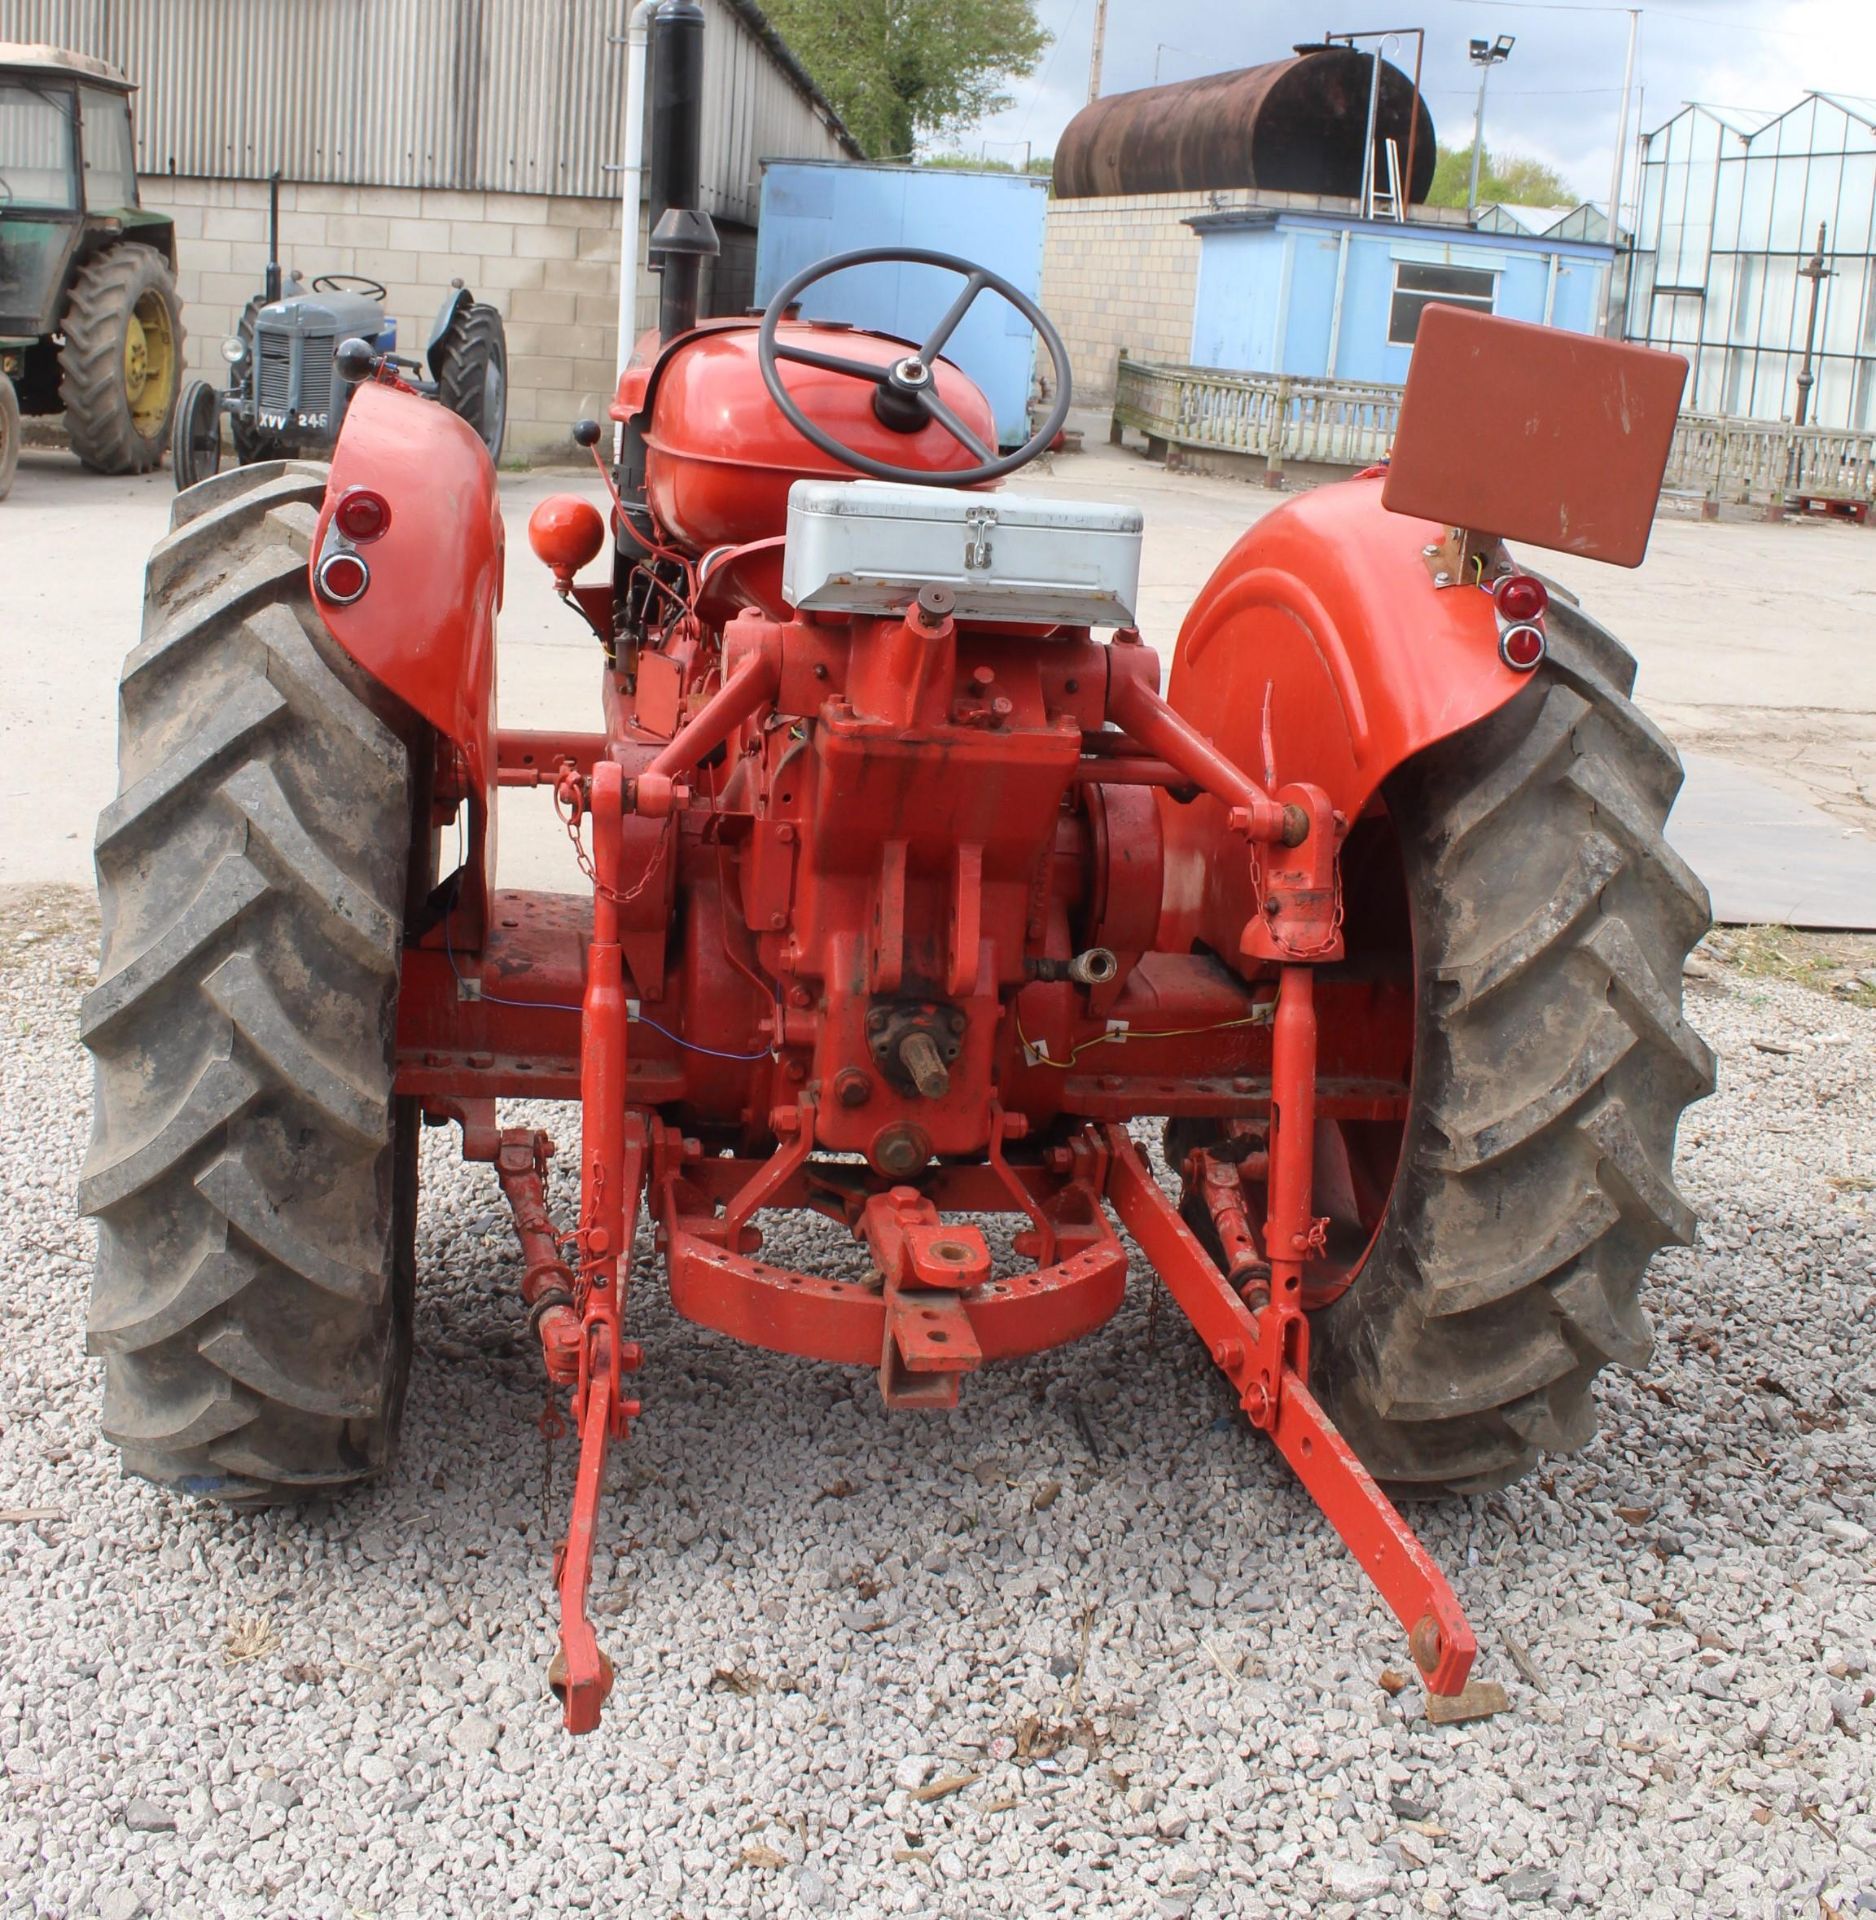 A NUFFIELD UNIVERSAL THREE TRACTOR GOOD ORDER RECENT REBUILD 4 NEW TYRES RE - CON STARTER CLUTCH & - Image 4 of 9